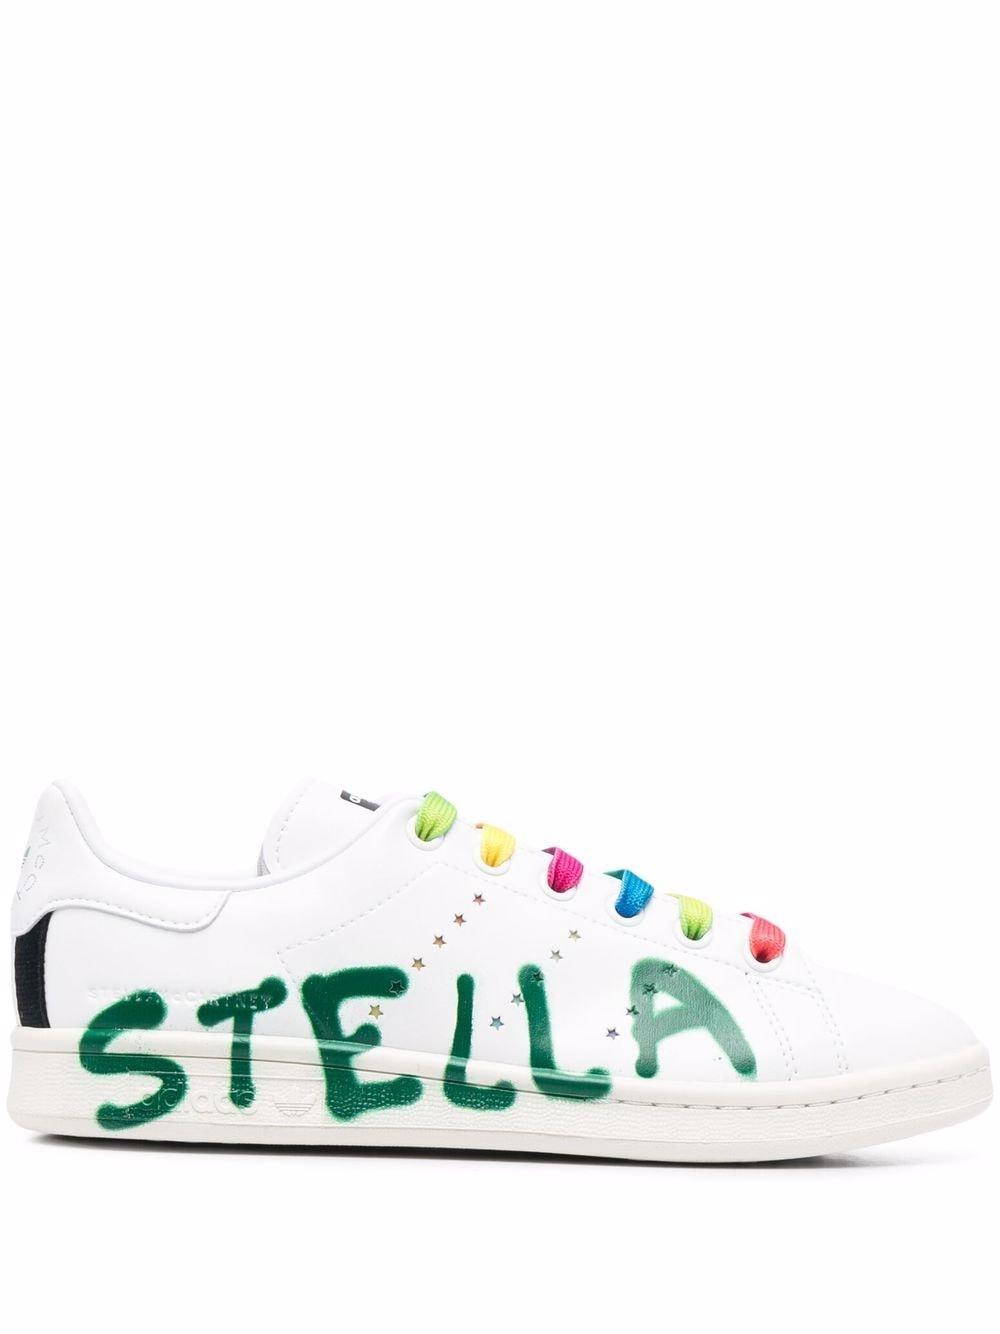 Stella McCartney Leather X Ed Curtis Stan Smith Vegan Sneakers in Green  (White) - Save 44% | Lyst